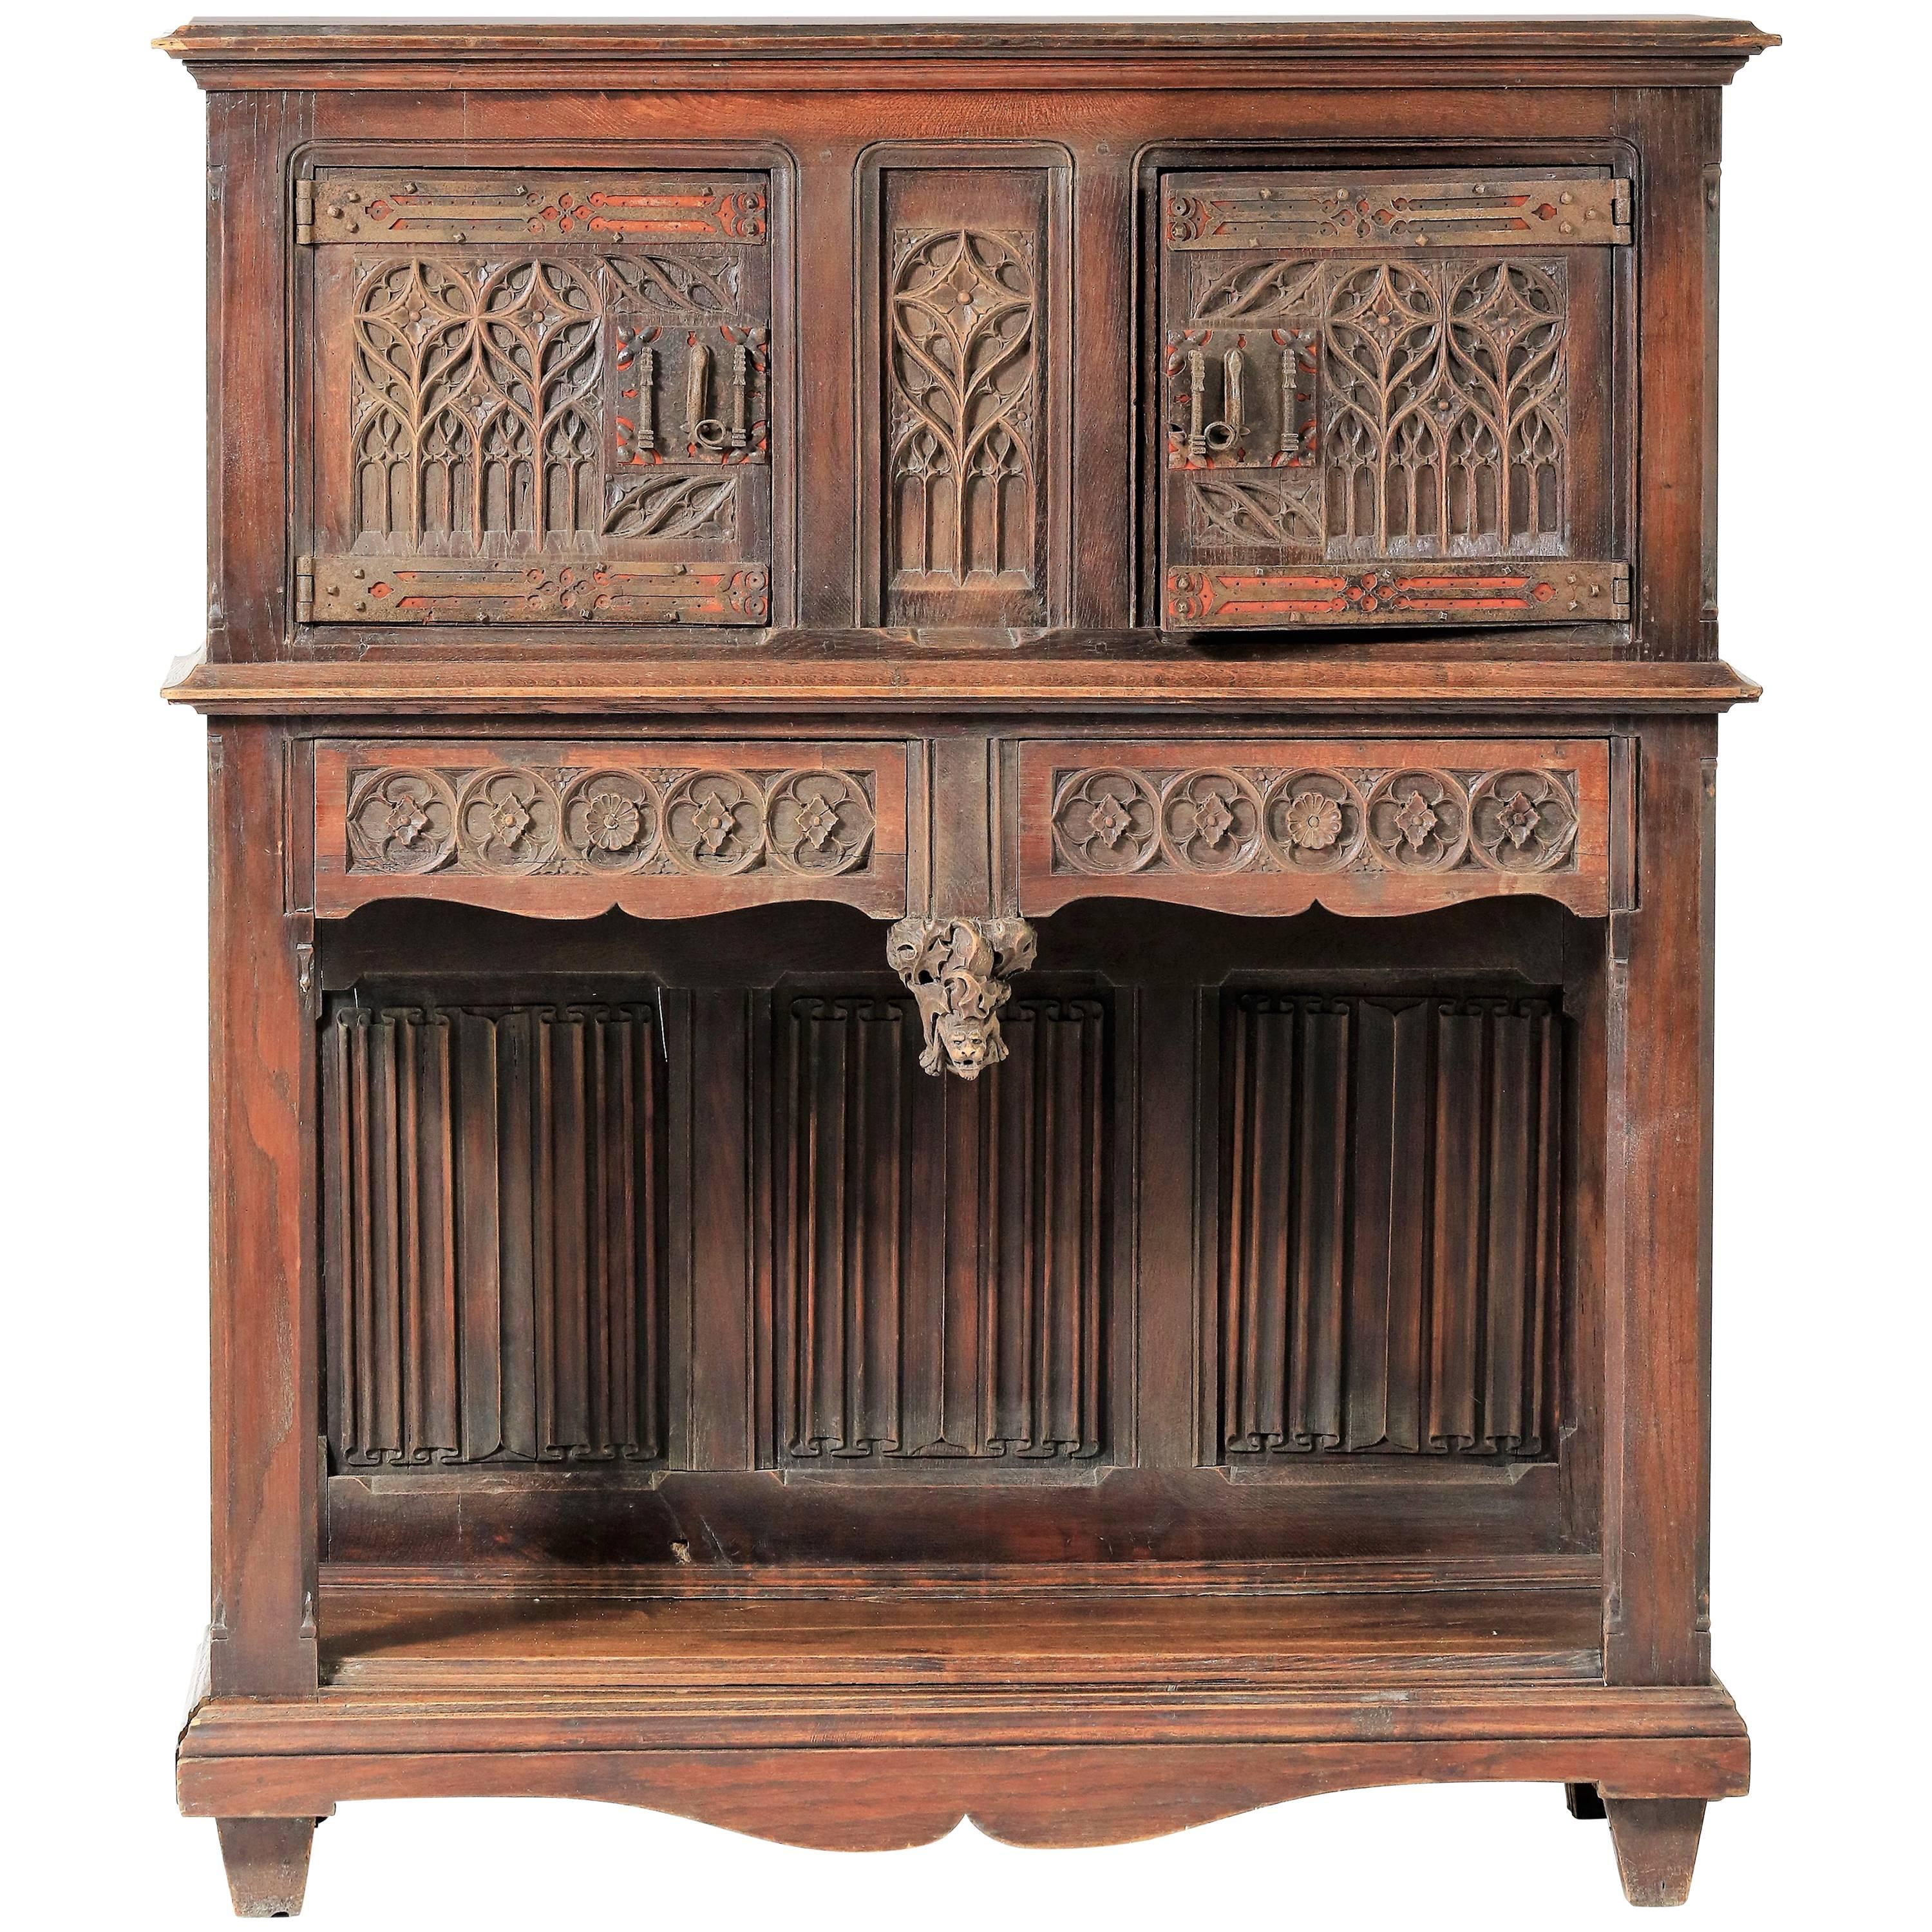 Gothic Revival Cabinet 19th Century Oak and Wrought Iron